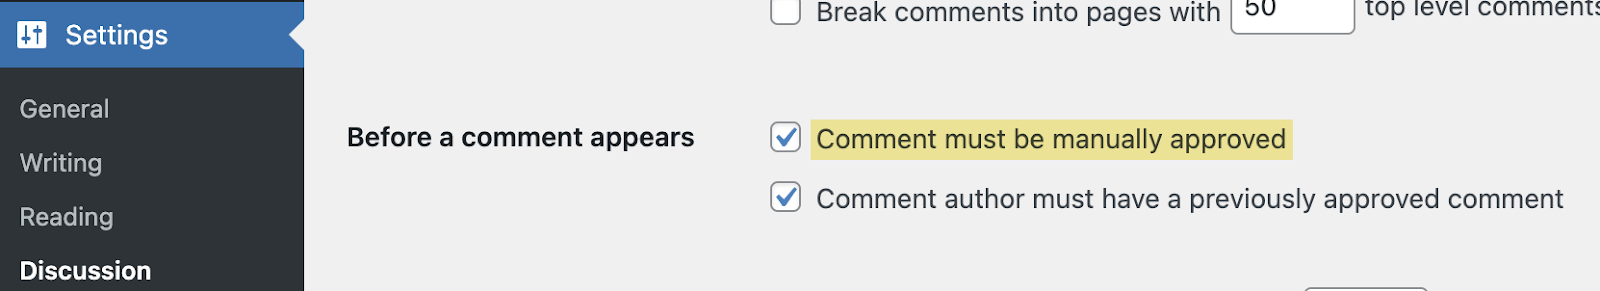 Blog comment approval in WordPress